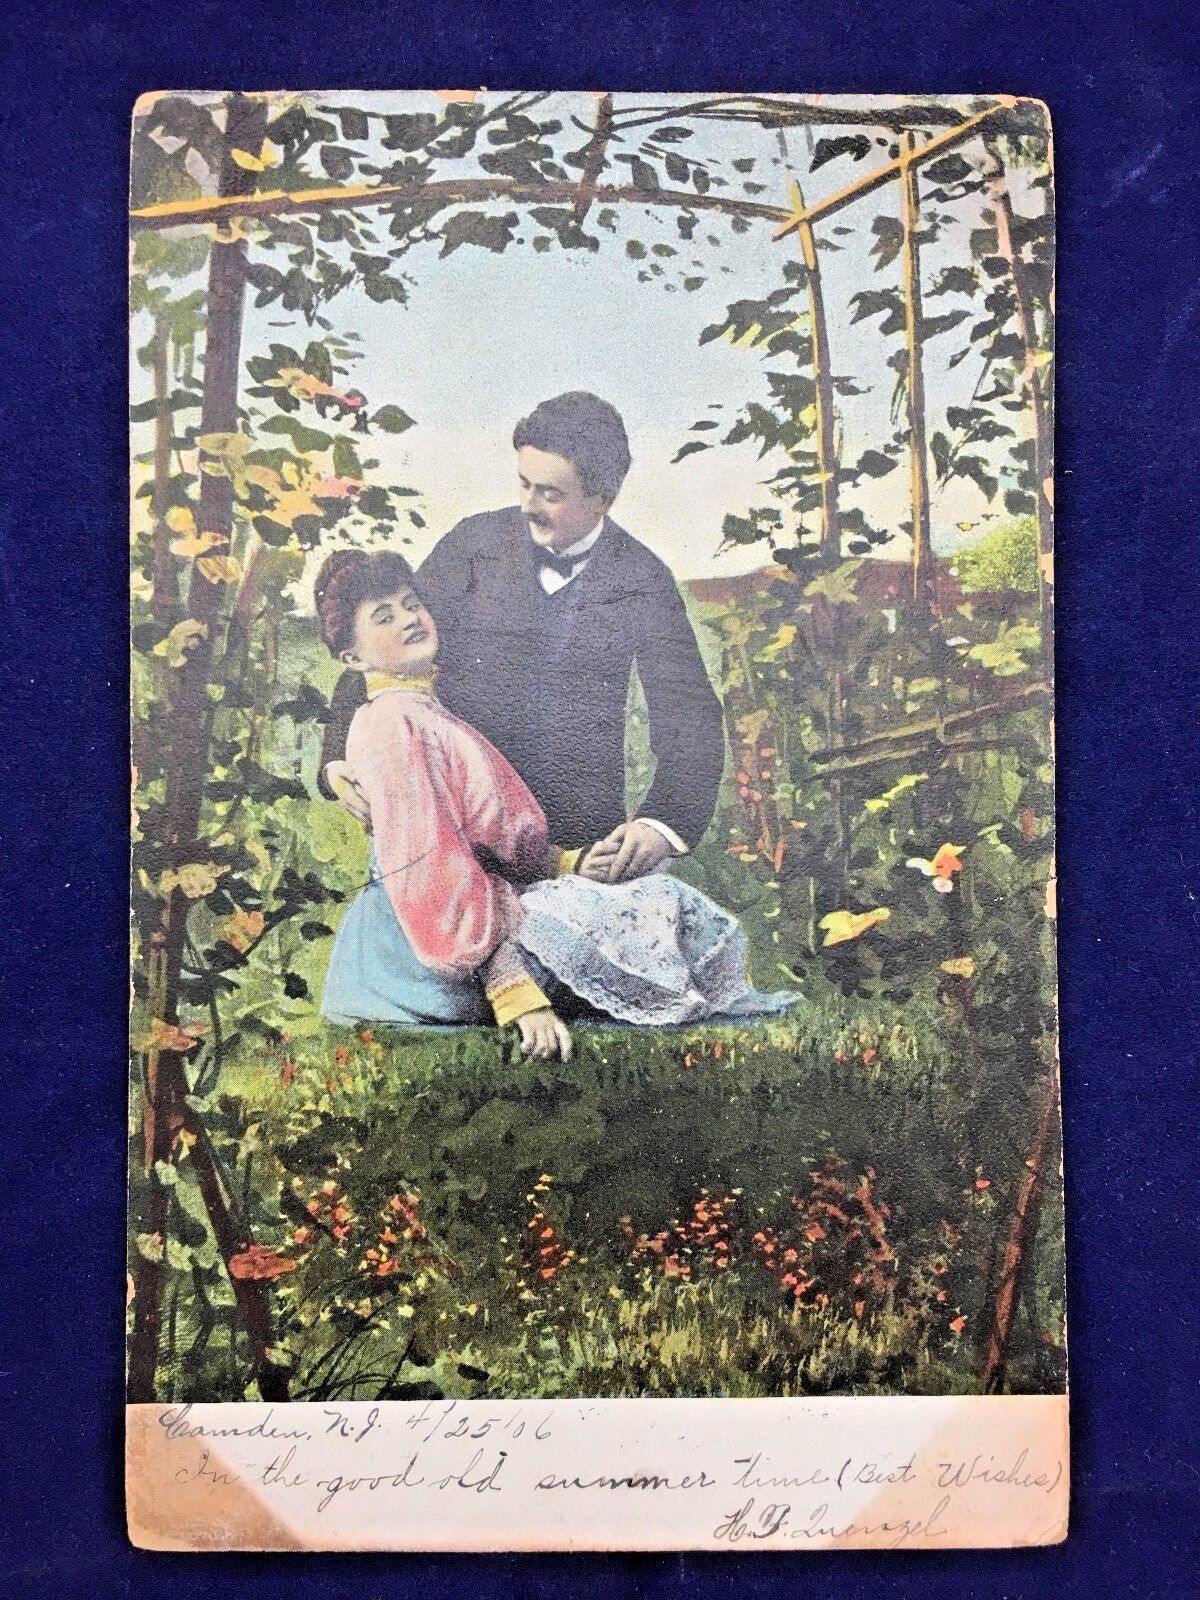 Best Wishes Loving Couple Cuddle in the Garden 1906 Antique Postcard (N9#173)